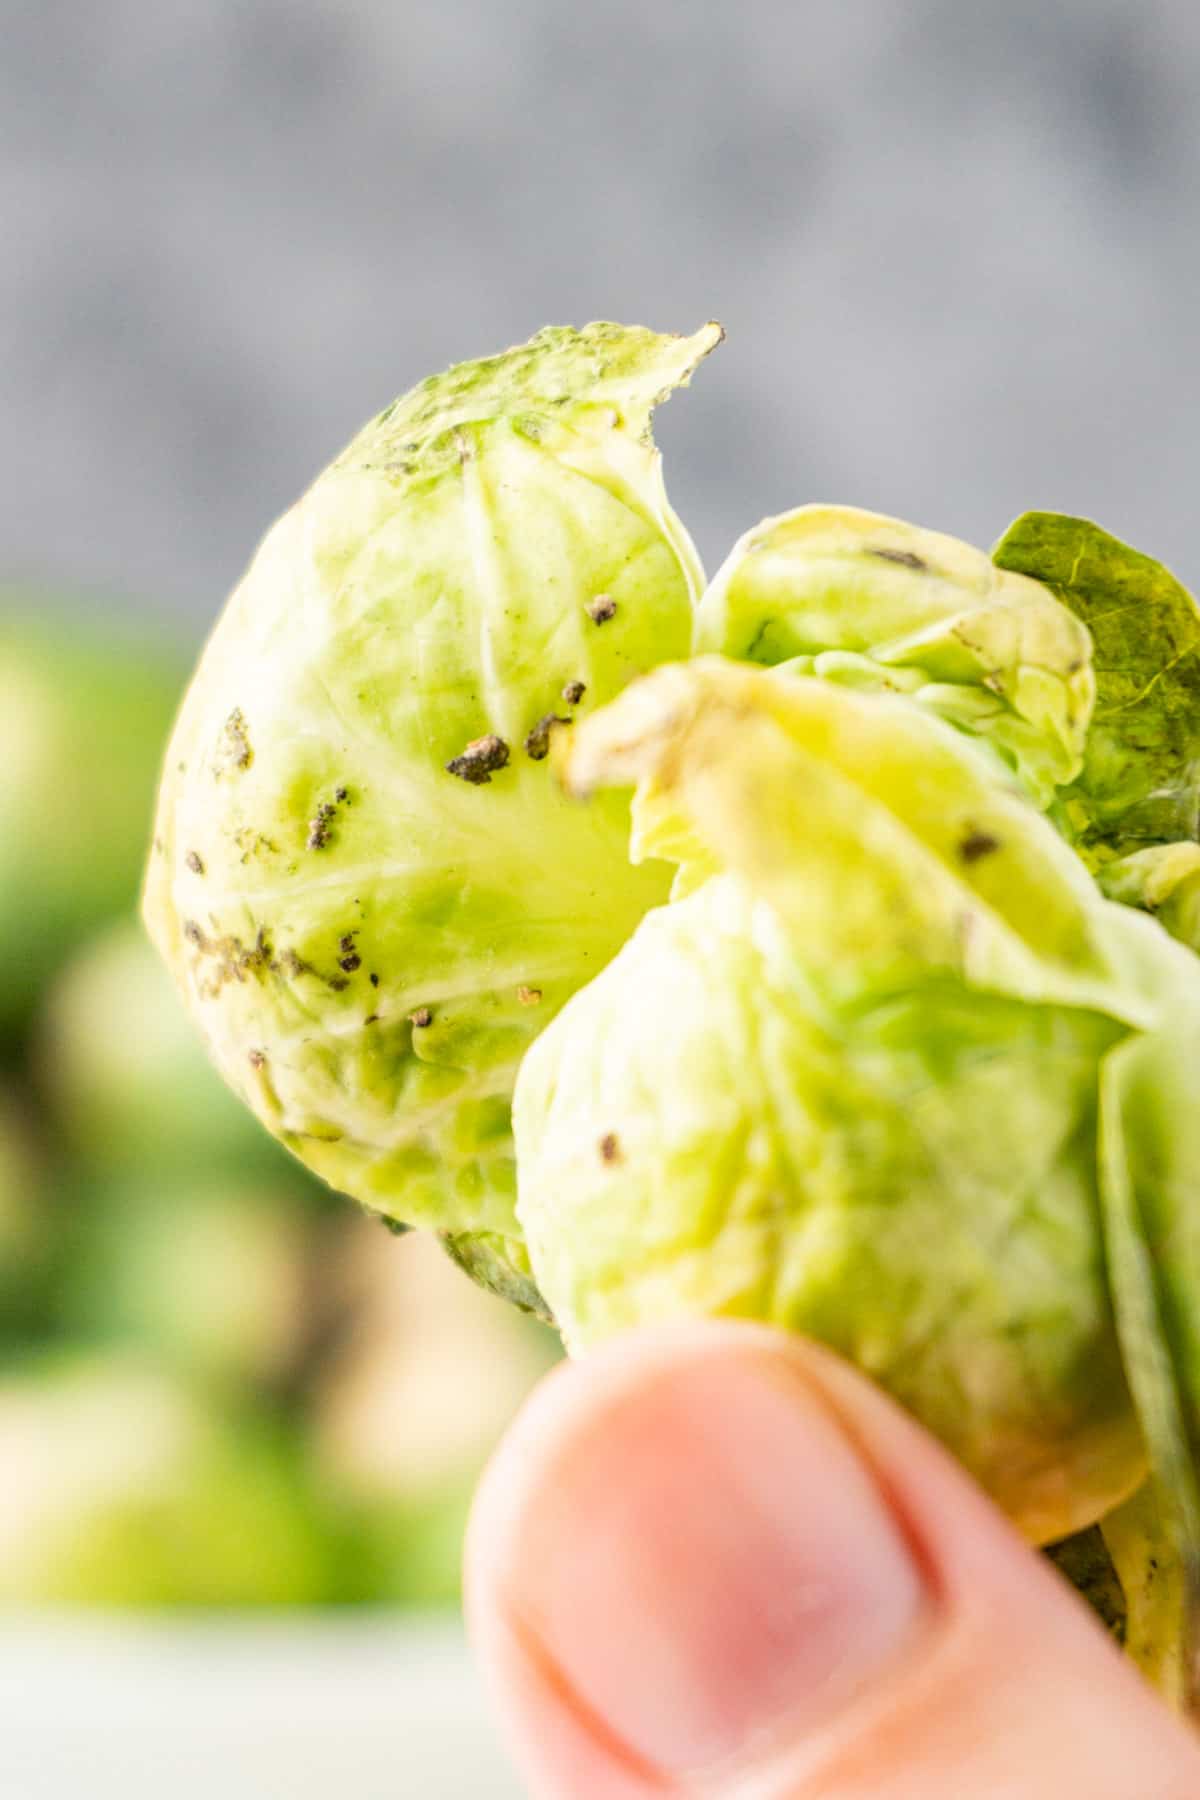 evidenced of worm poop and dirt inside leaves of brussel sprout